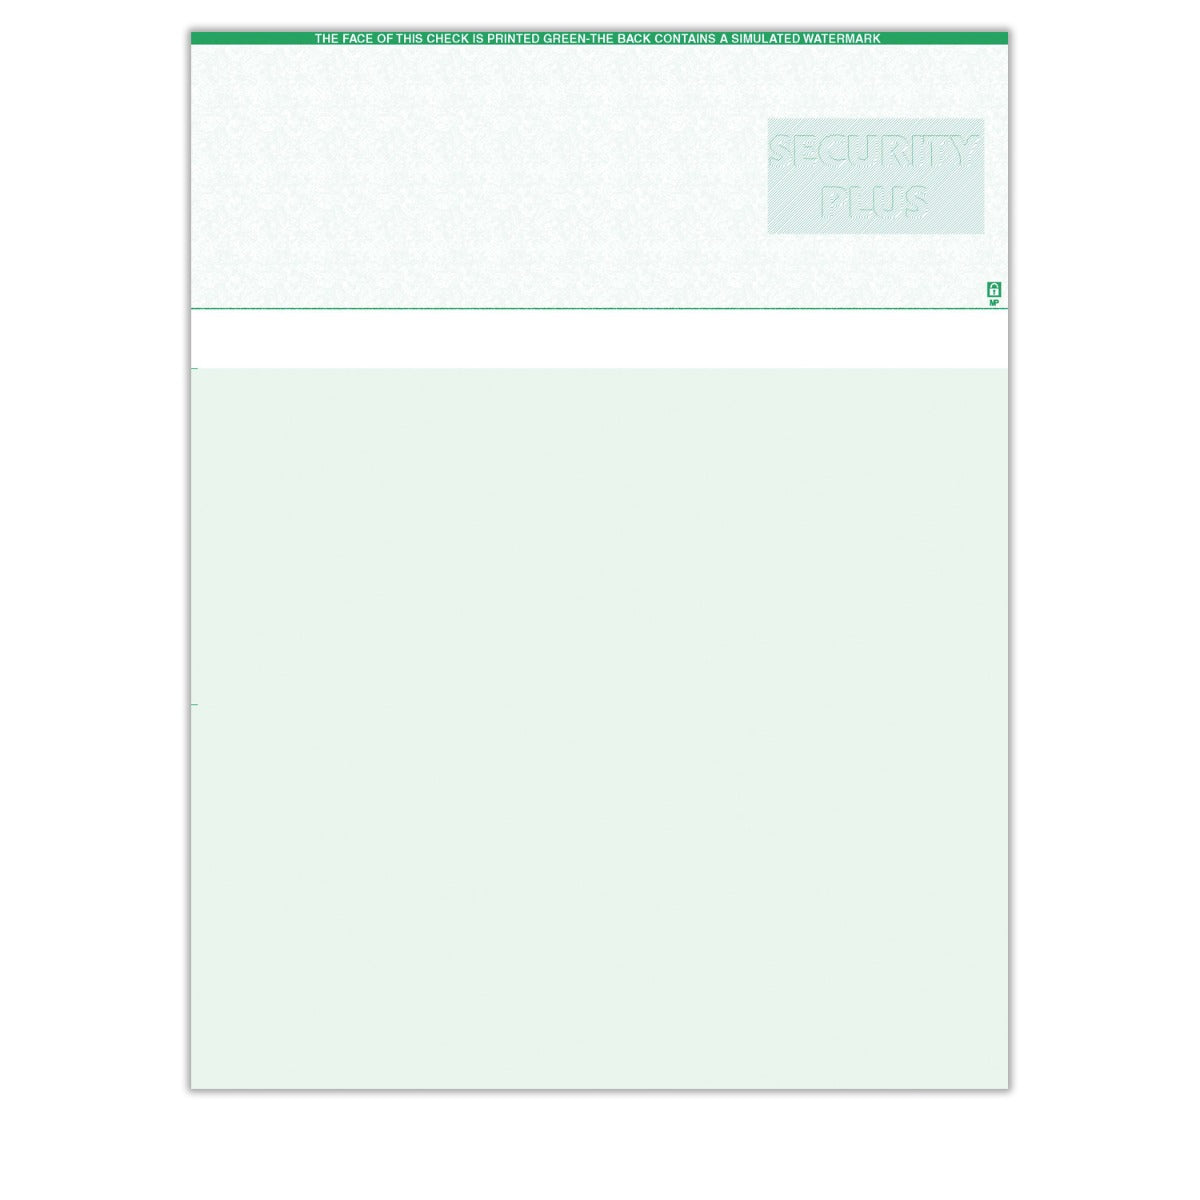 TROY Security Plus Check Paper, Green, Check Top, Ream